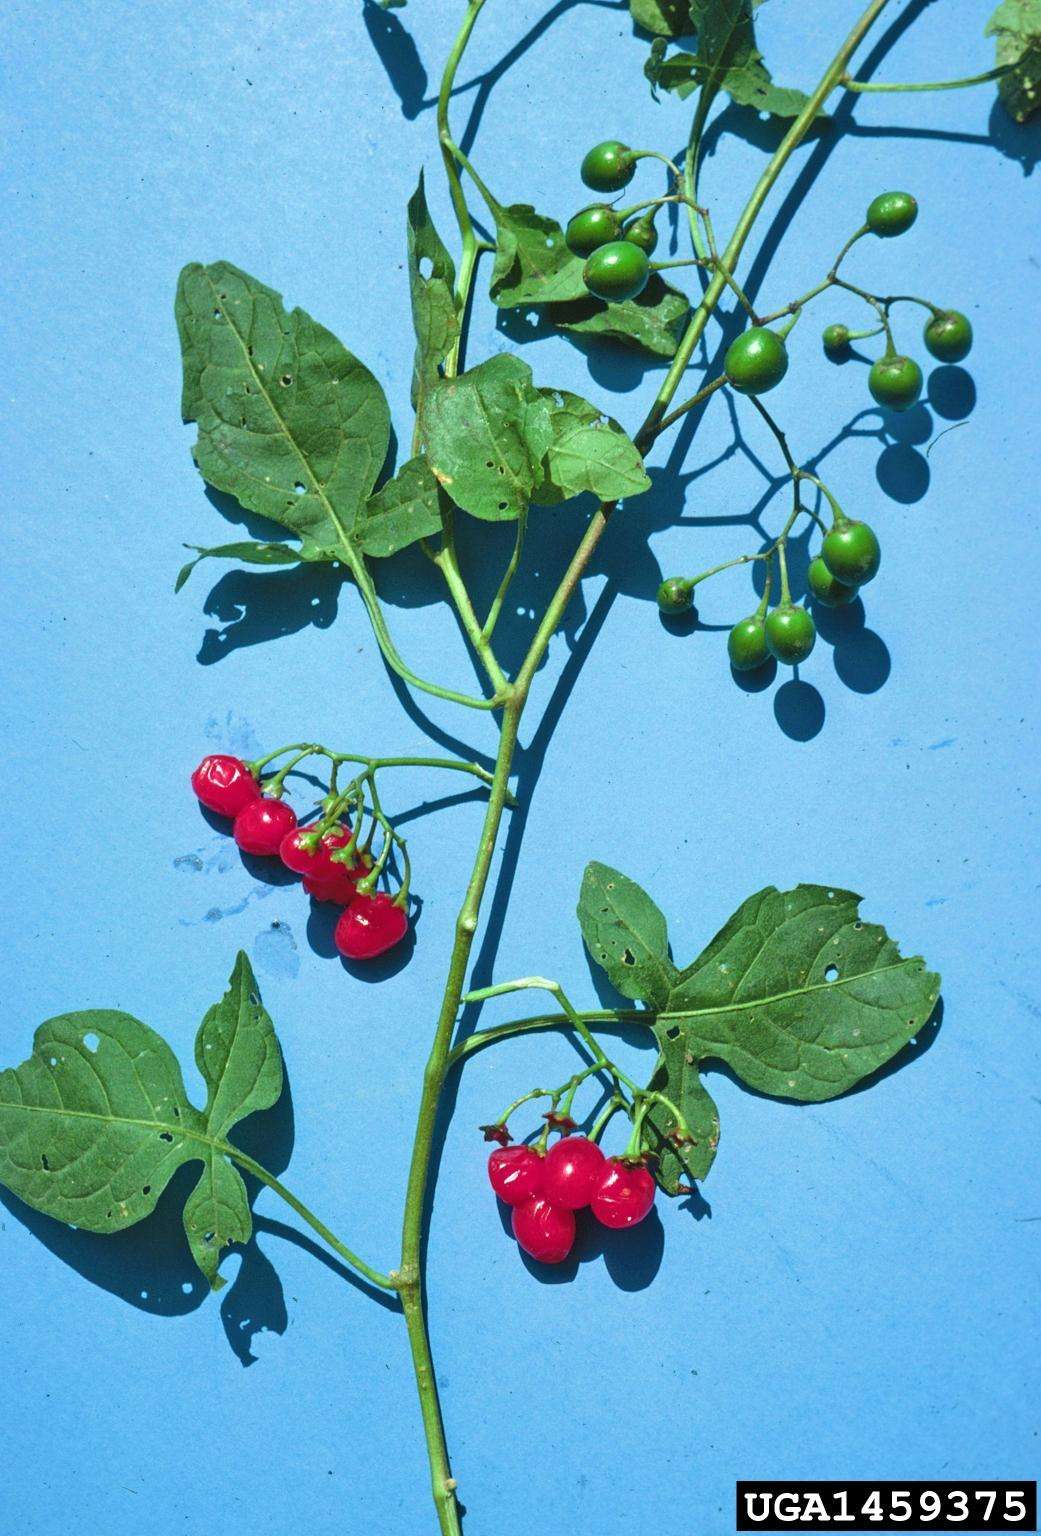 Branch of a bittersweet plant with green leaves and red and green fruits.